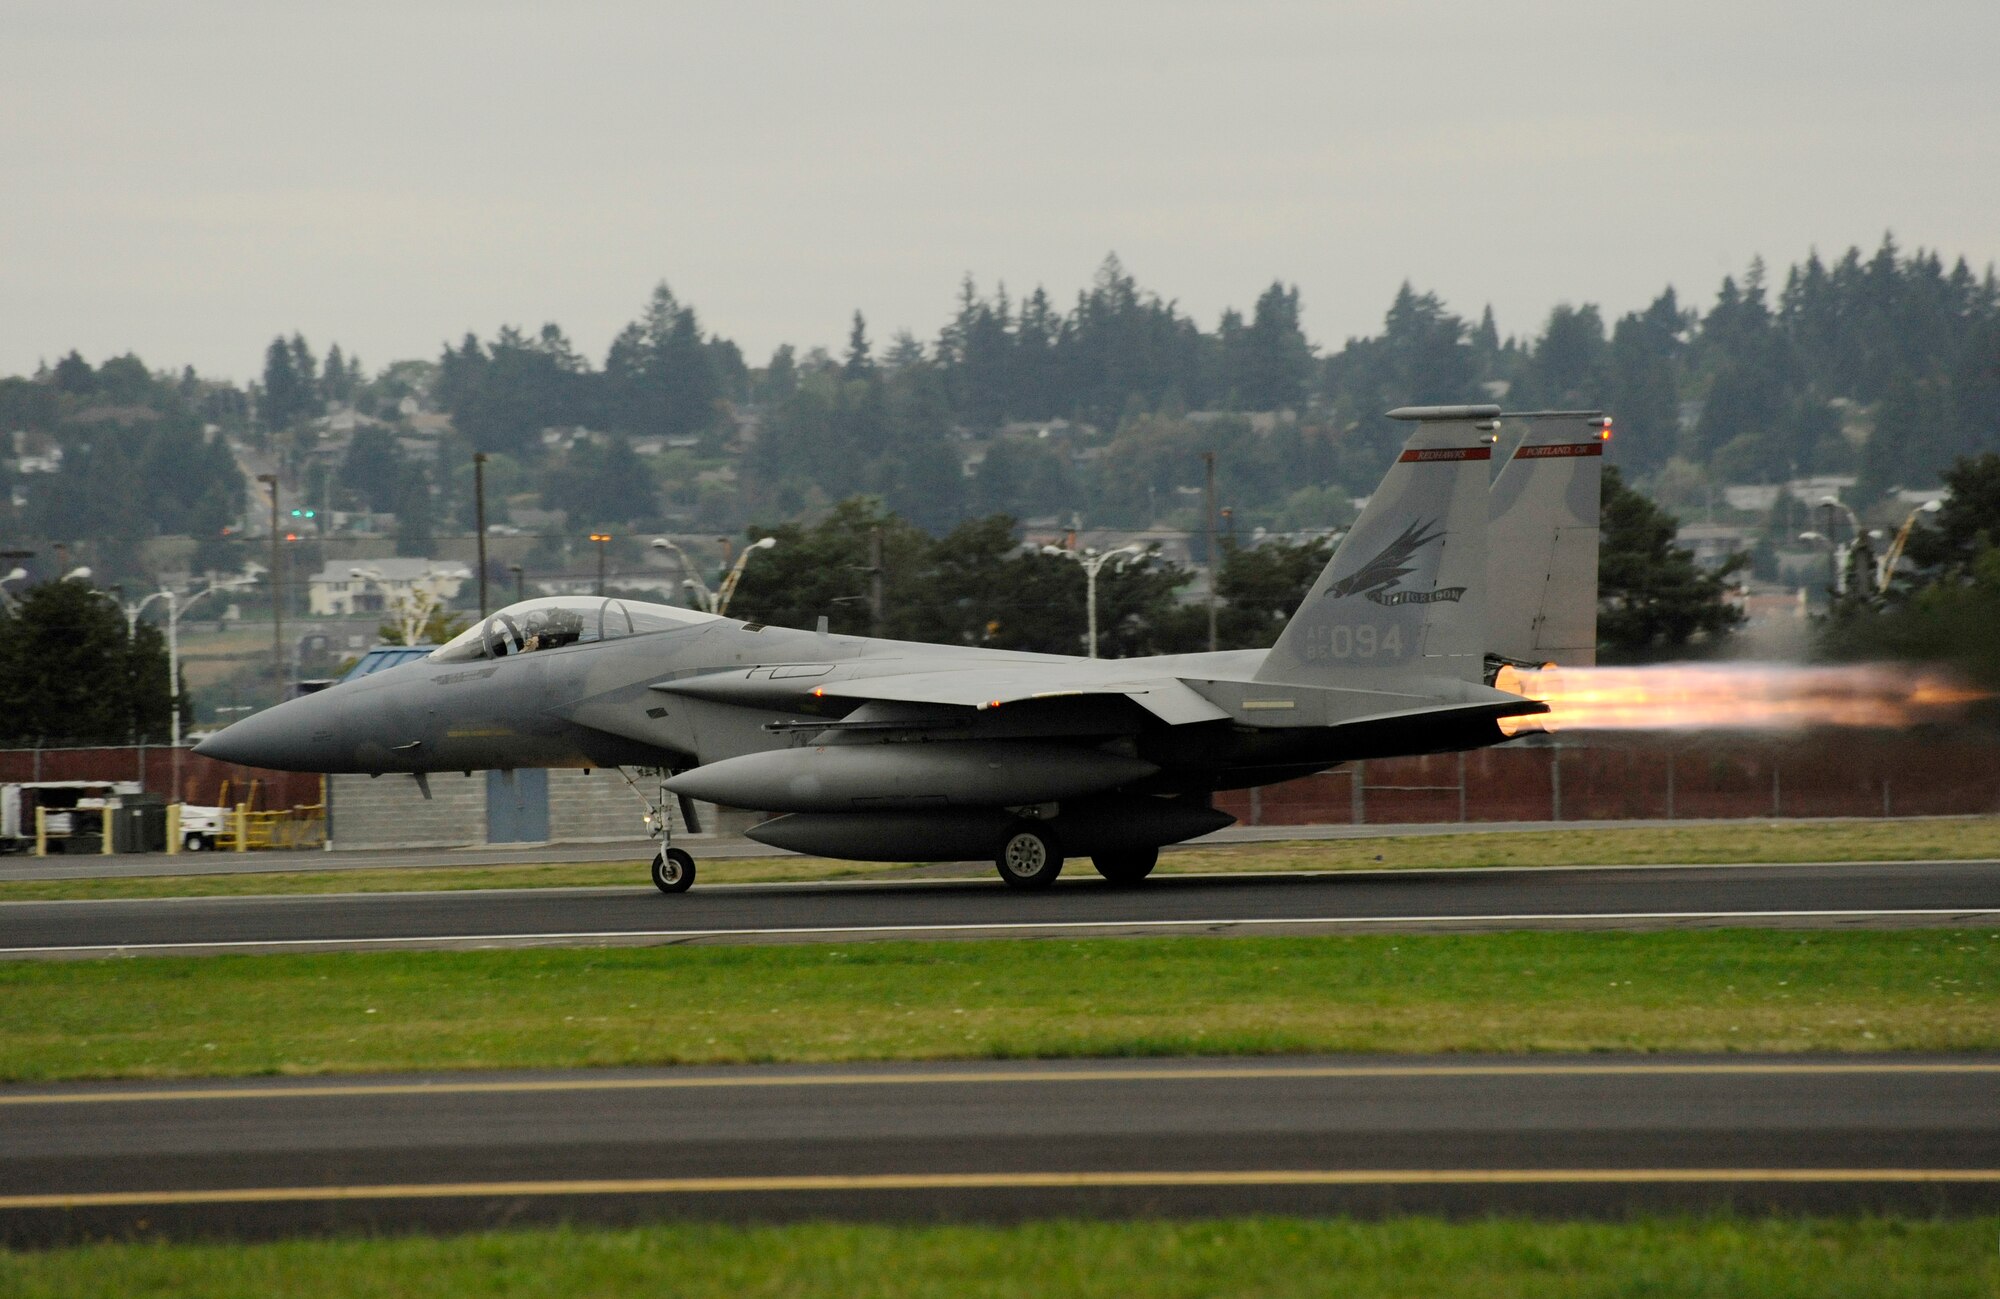 An Oregon Air National Guard F-15C Eagle takes off from the Portland Air National Guard Base, Portland, Ore., on October 2nd, 2010. (US Air Force photographby Staff Sgt. John Hughel, 142nd Fighter Wing Public Affairs)